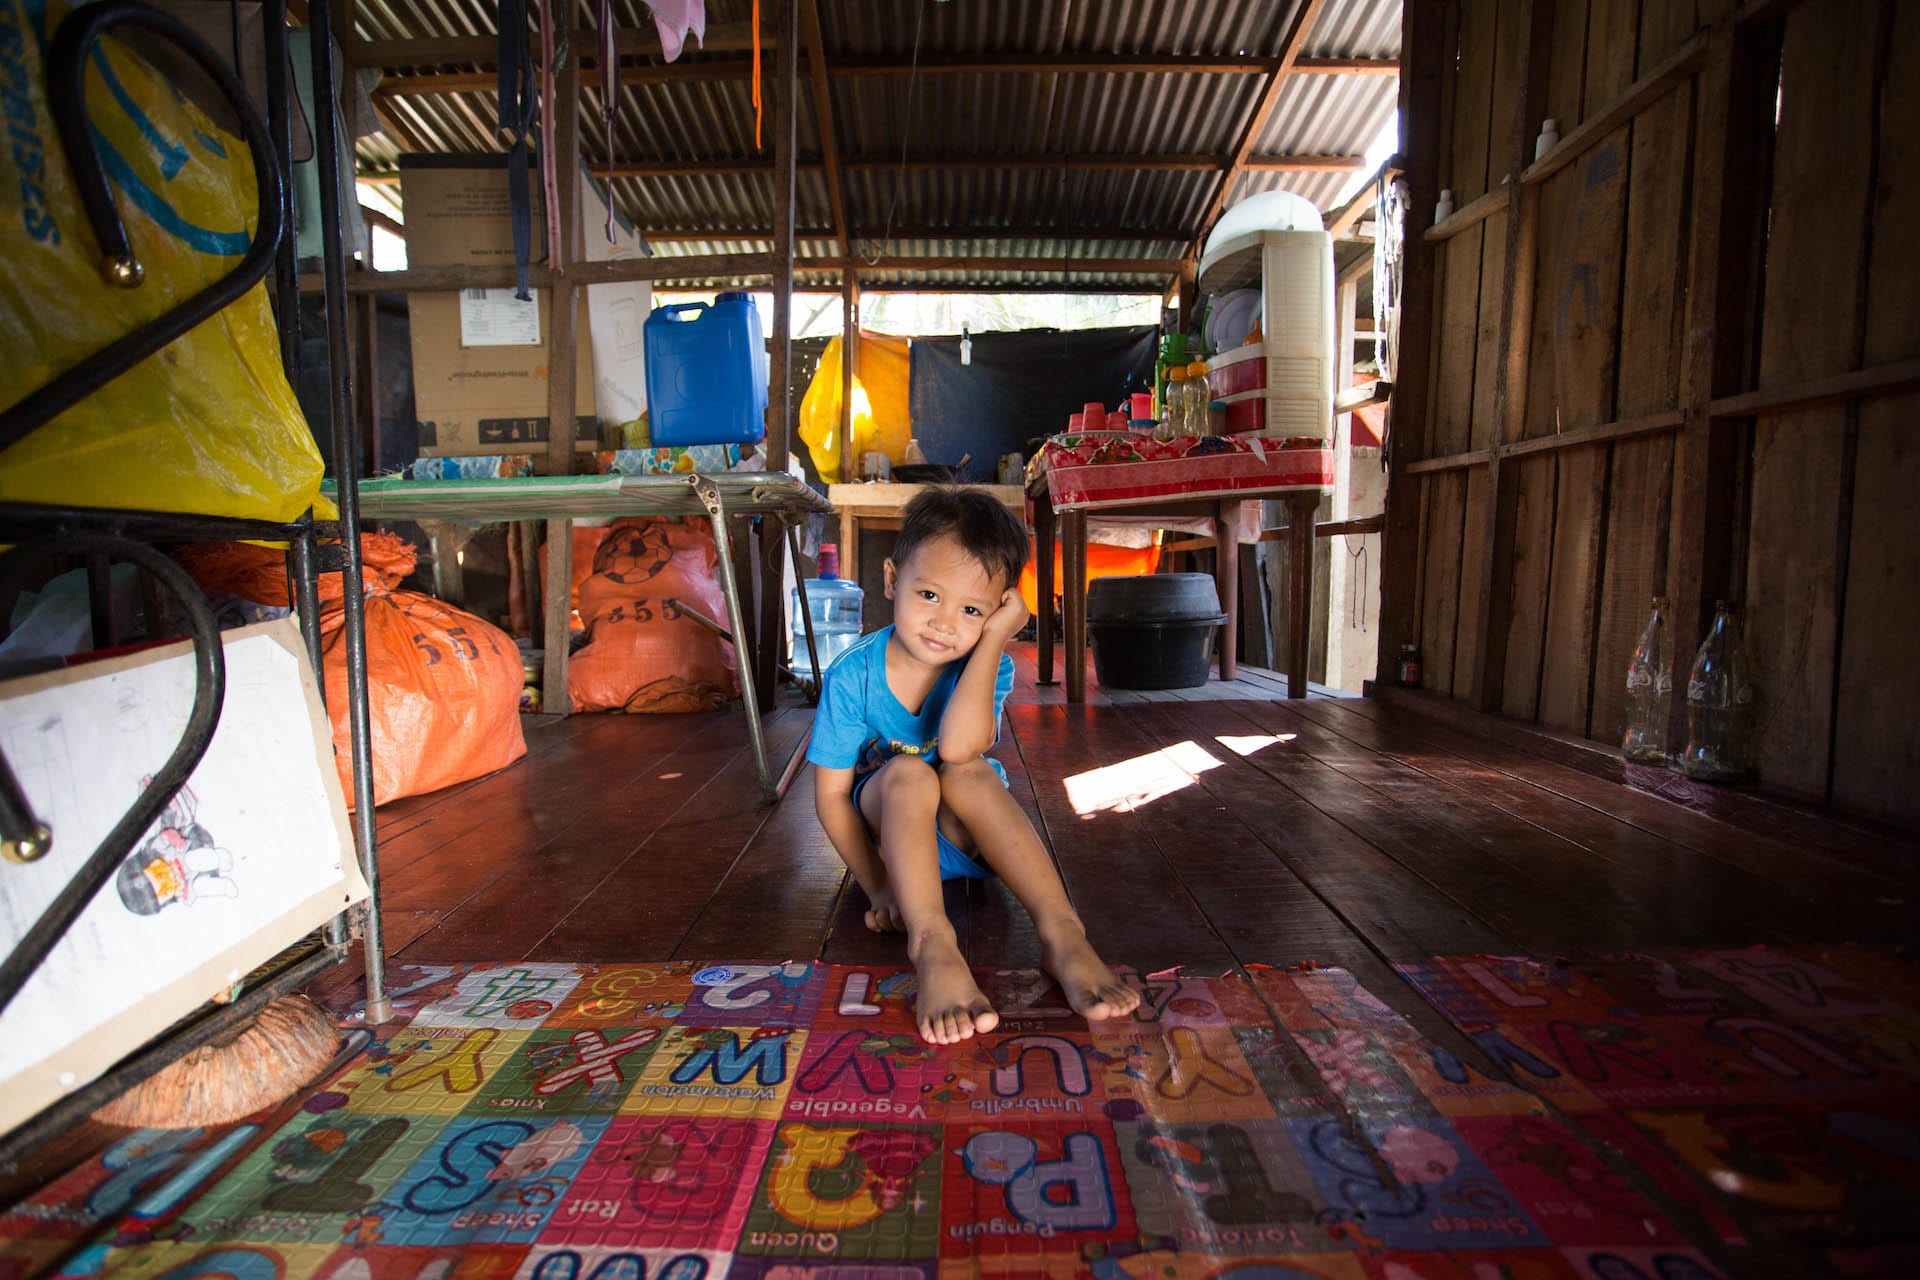 A young Filipino boy sits on the floor of his home. His legs are straight out in front of him and his head leans on his arm. He is wearing a blue t-shirt.